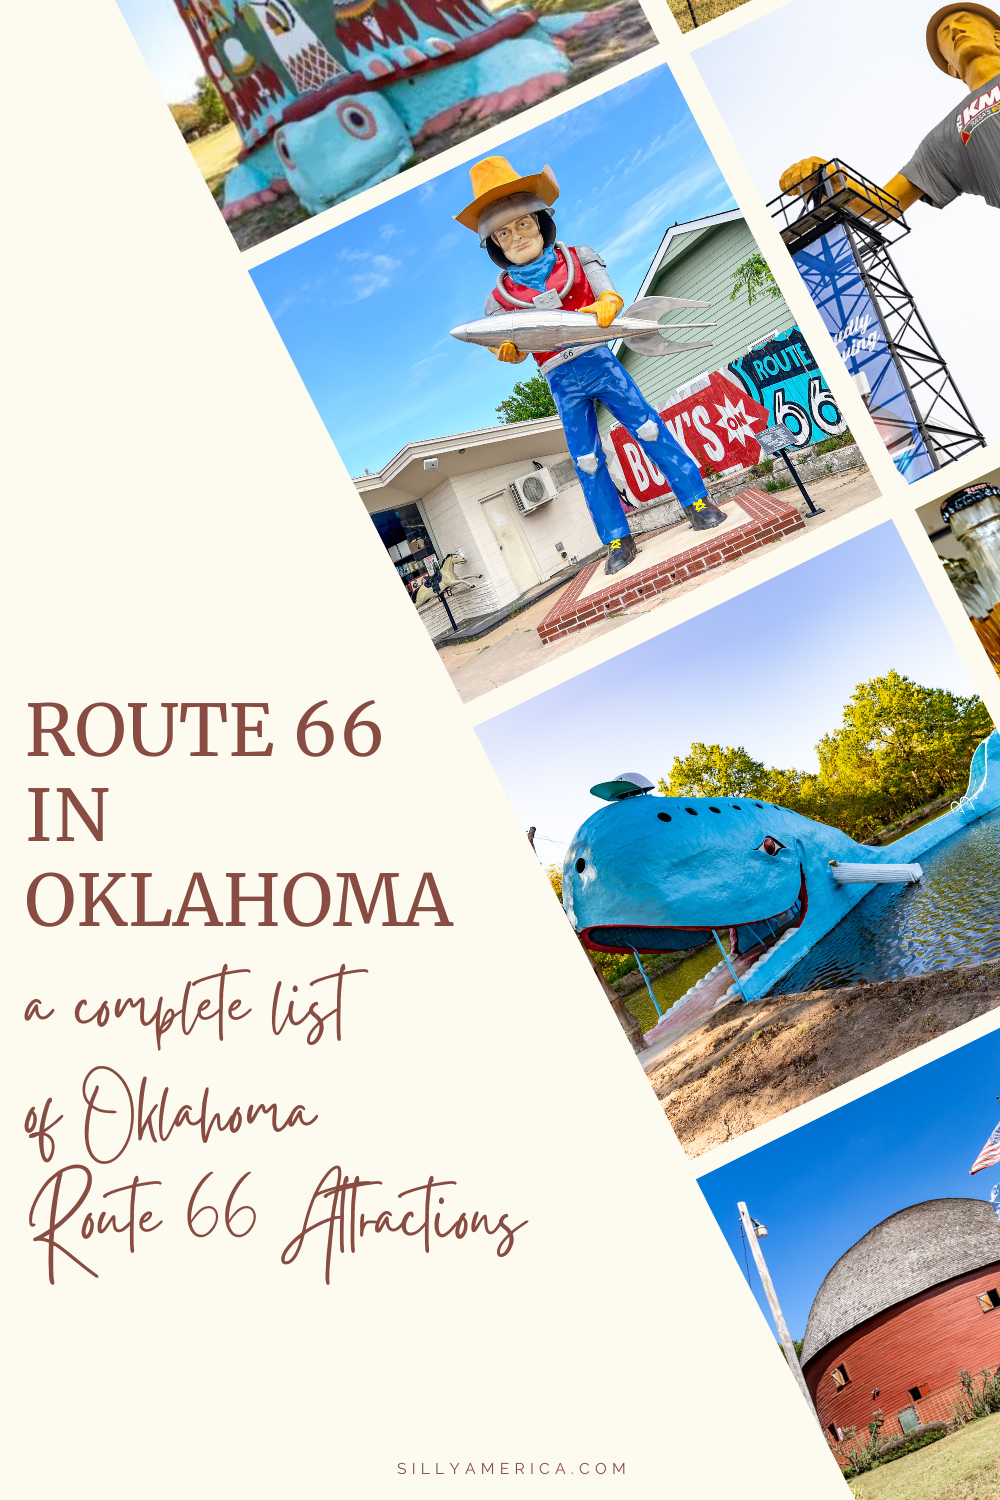 If you’re looking for classic roadside attractions, iconic diners, informative museums, and nostalgic nods to the past, a road trip on Route 66 in Oklahoma offers everything you’re looking for. Pull over at any and all of the stops on this complete list of Oklahoma Route 66 Attractions and start planning your road trip on the Mother Road today. #Route66 #Oklahoma #Route66RoadTrip #OklahomaRoute66 #OklahomaRoute66RoadTrip #OklahomaRoadTrip #travel #RoadTrip